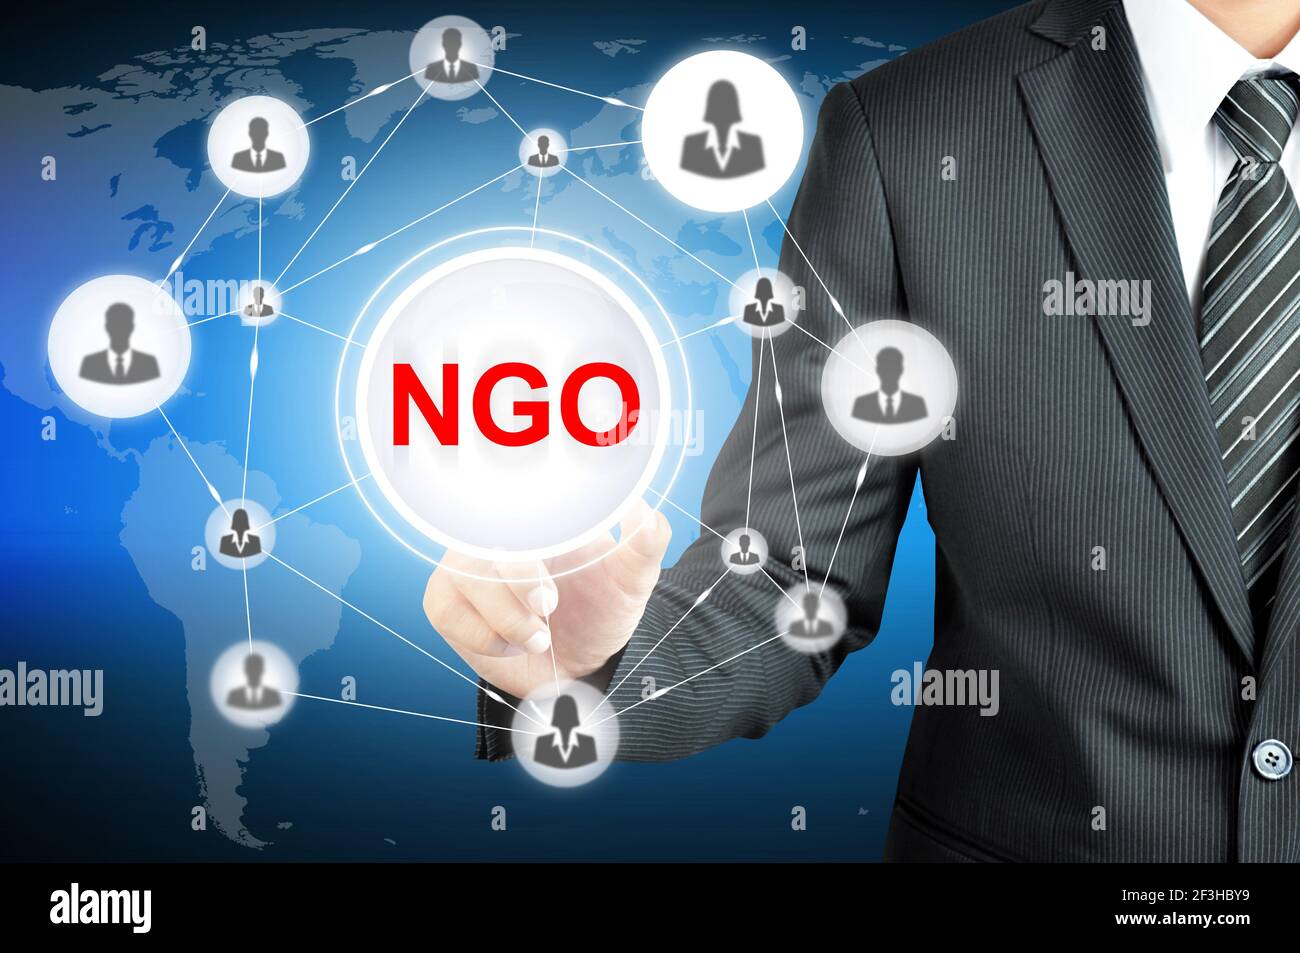 Businessman pointing on NGO (Non-Governmental Organization) sign on virtual screen with people icons linked as network Stock Photo